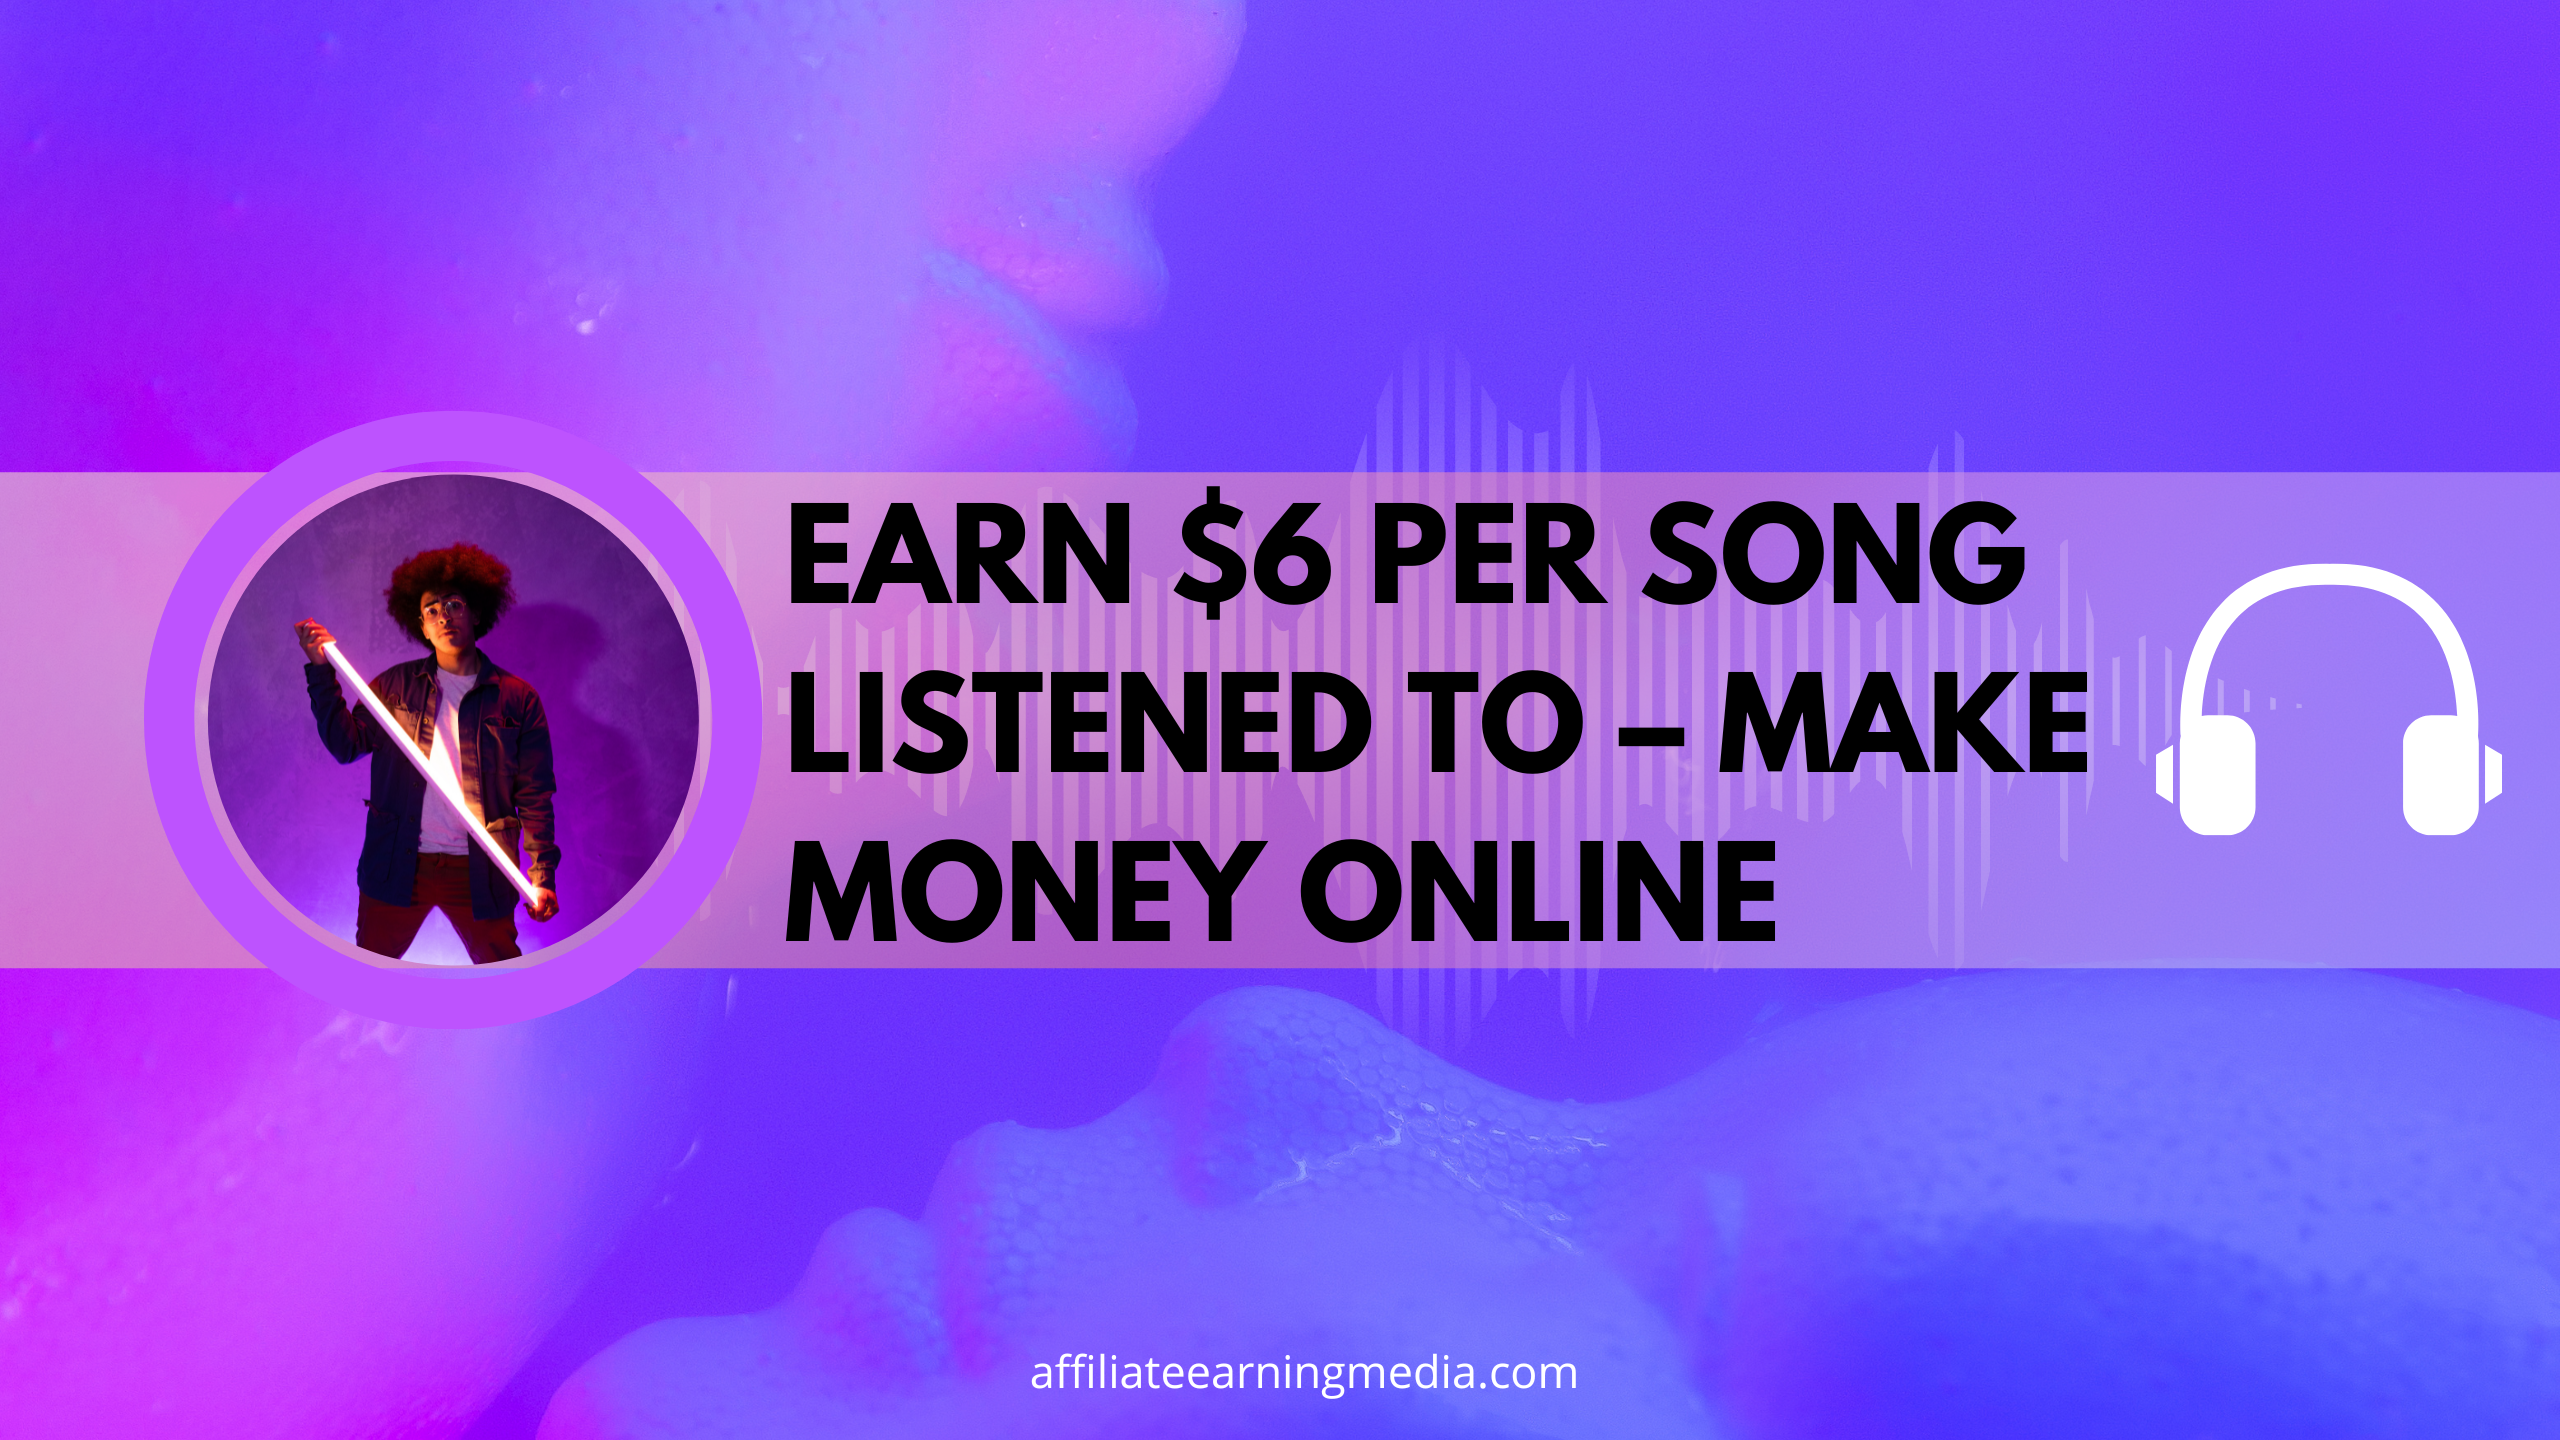 Earn $6 PER SONG Listened To – Make Money Online